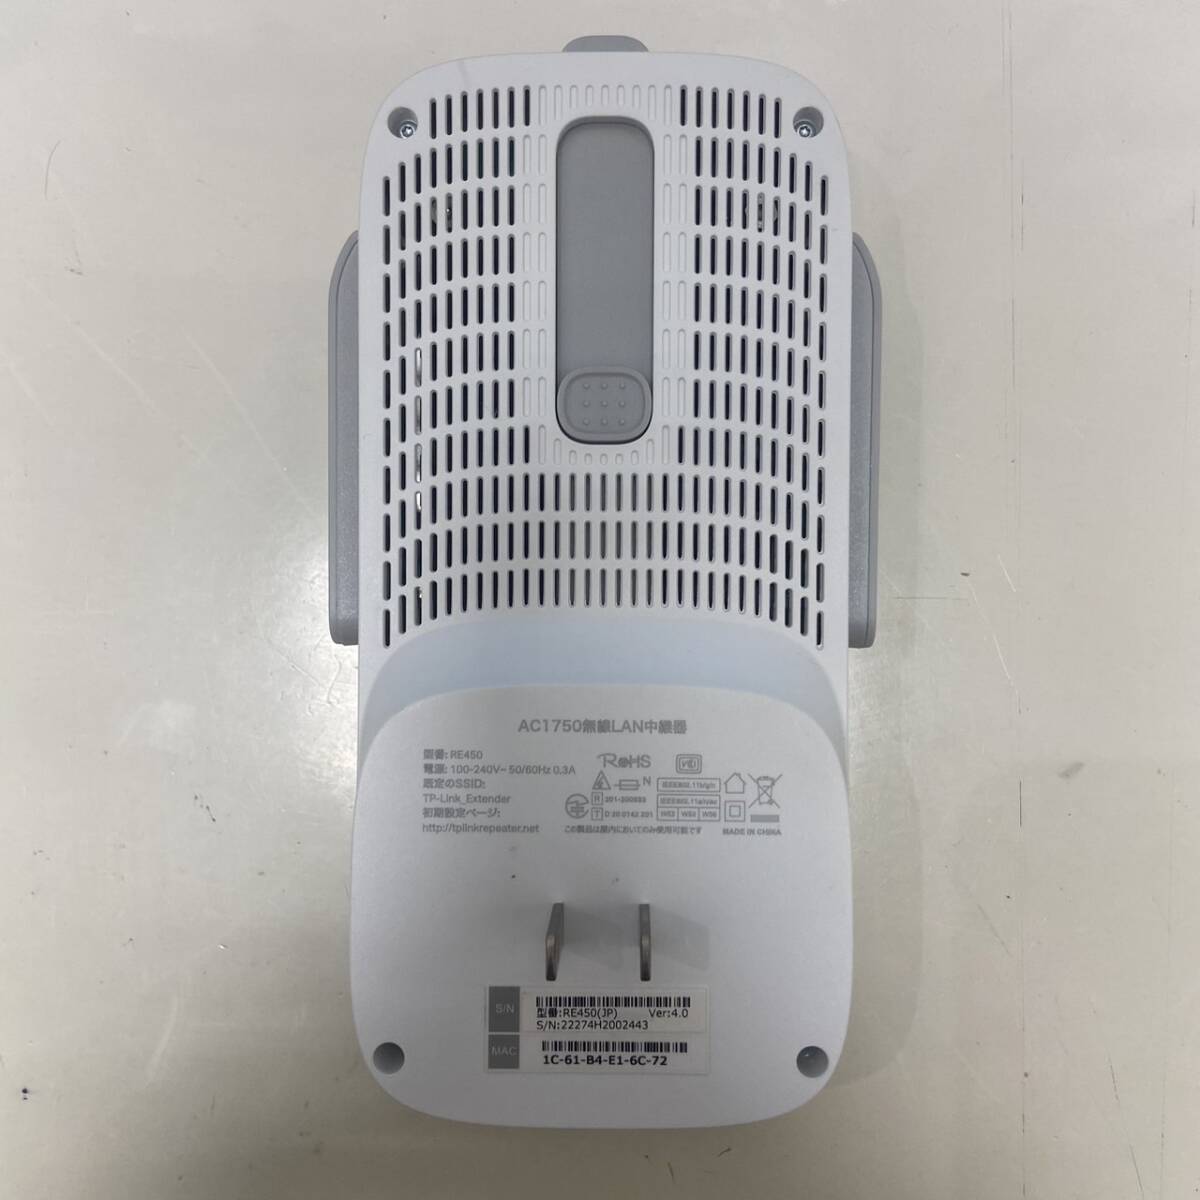 [B-13943] 1 jpy start TP-link RE450 mesh Wi-Fi relay vessel AC1750 dual band box attaching electrification has confirmed condition photograph reference 